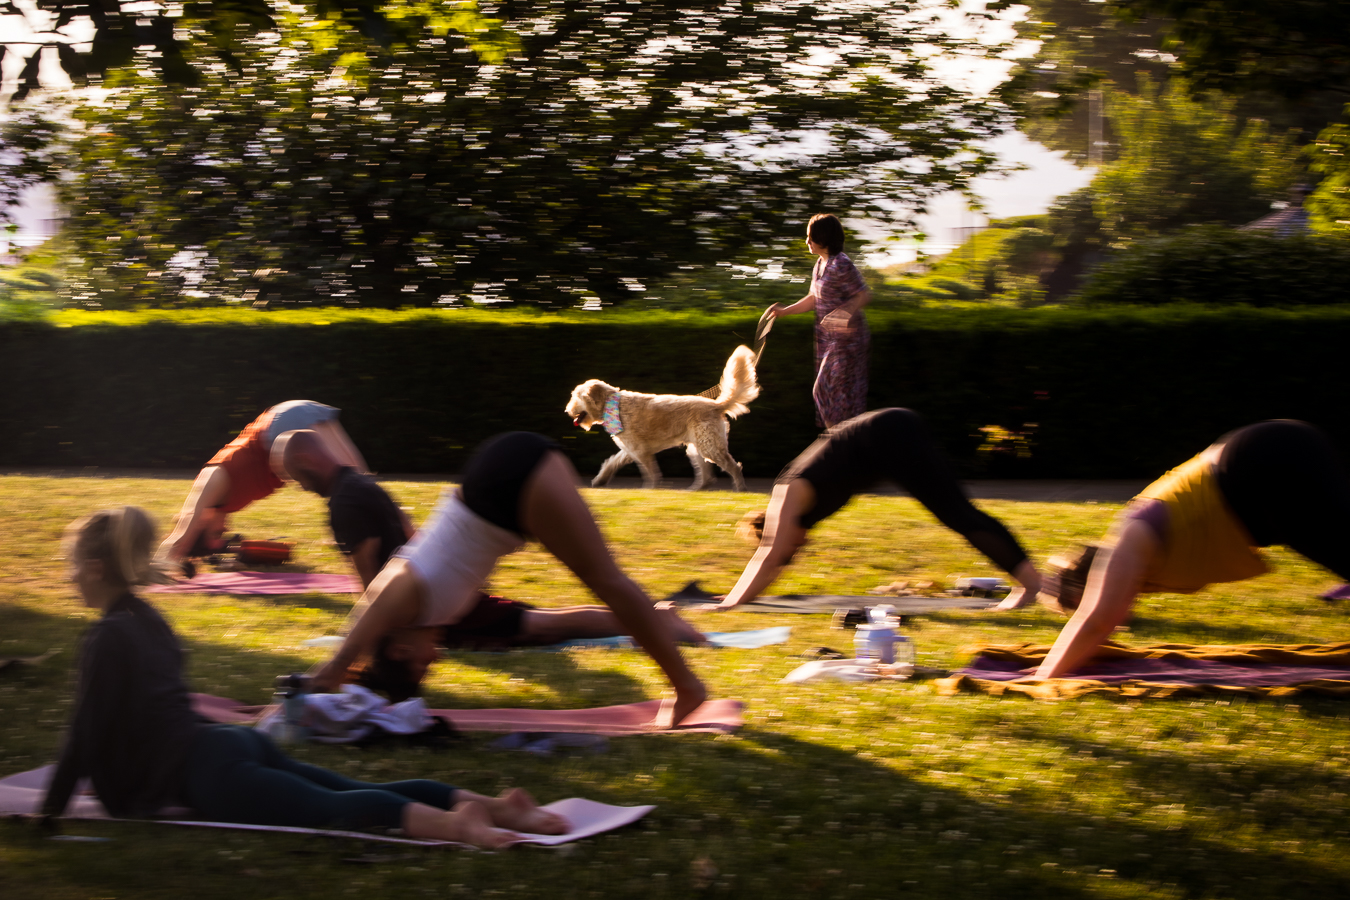 fun image of this senior as she skates away with her dog in the middle of an outdoor yoga class during this Creative Harrisburg Photography session